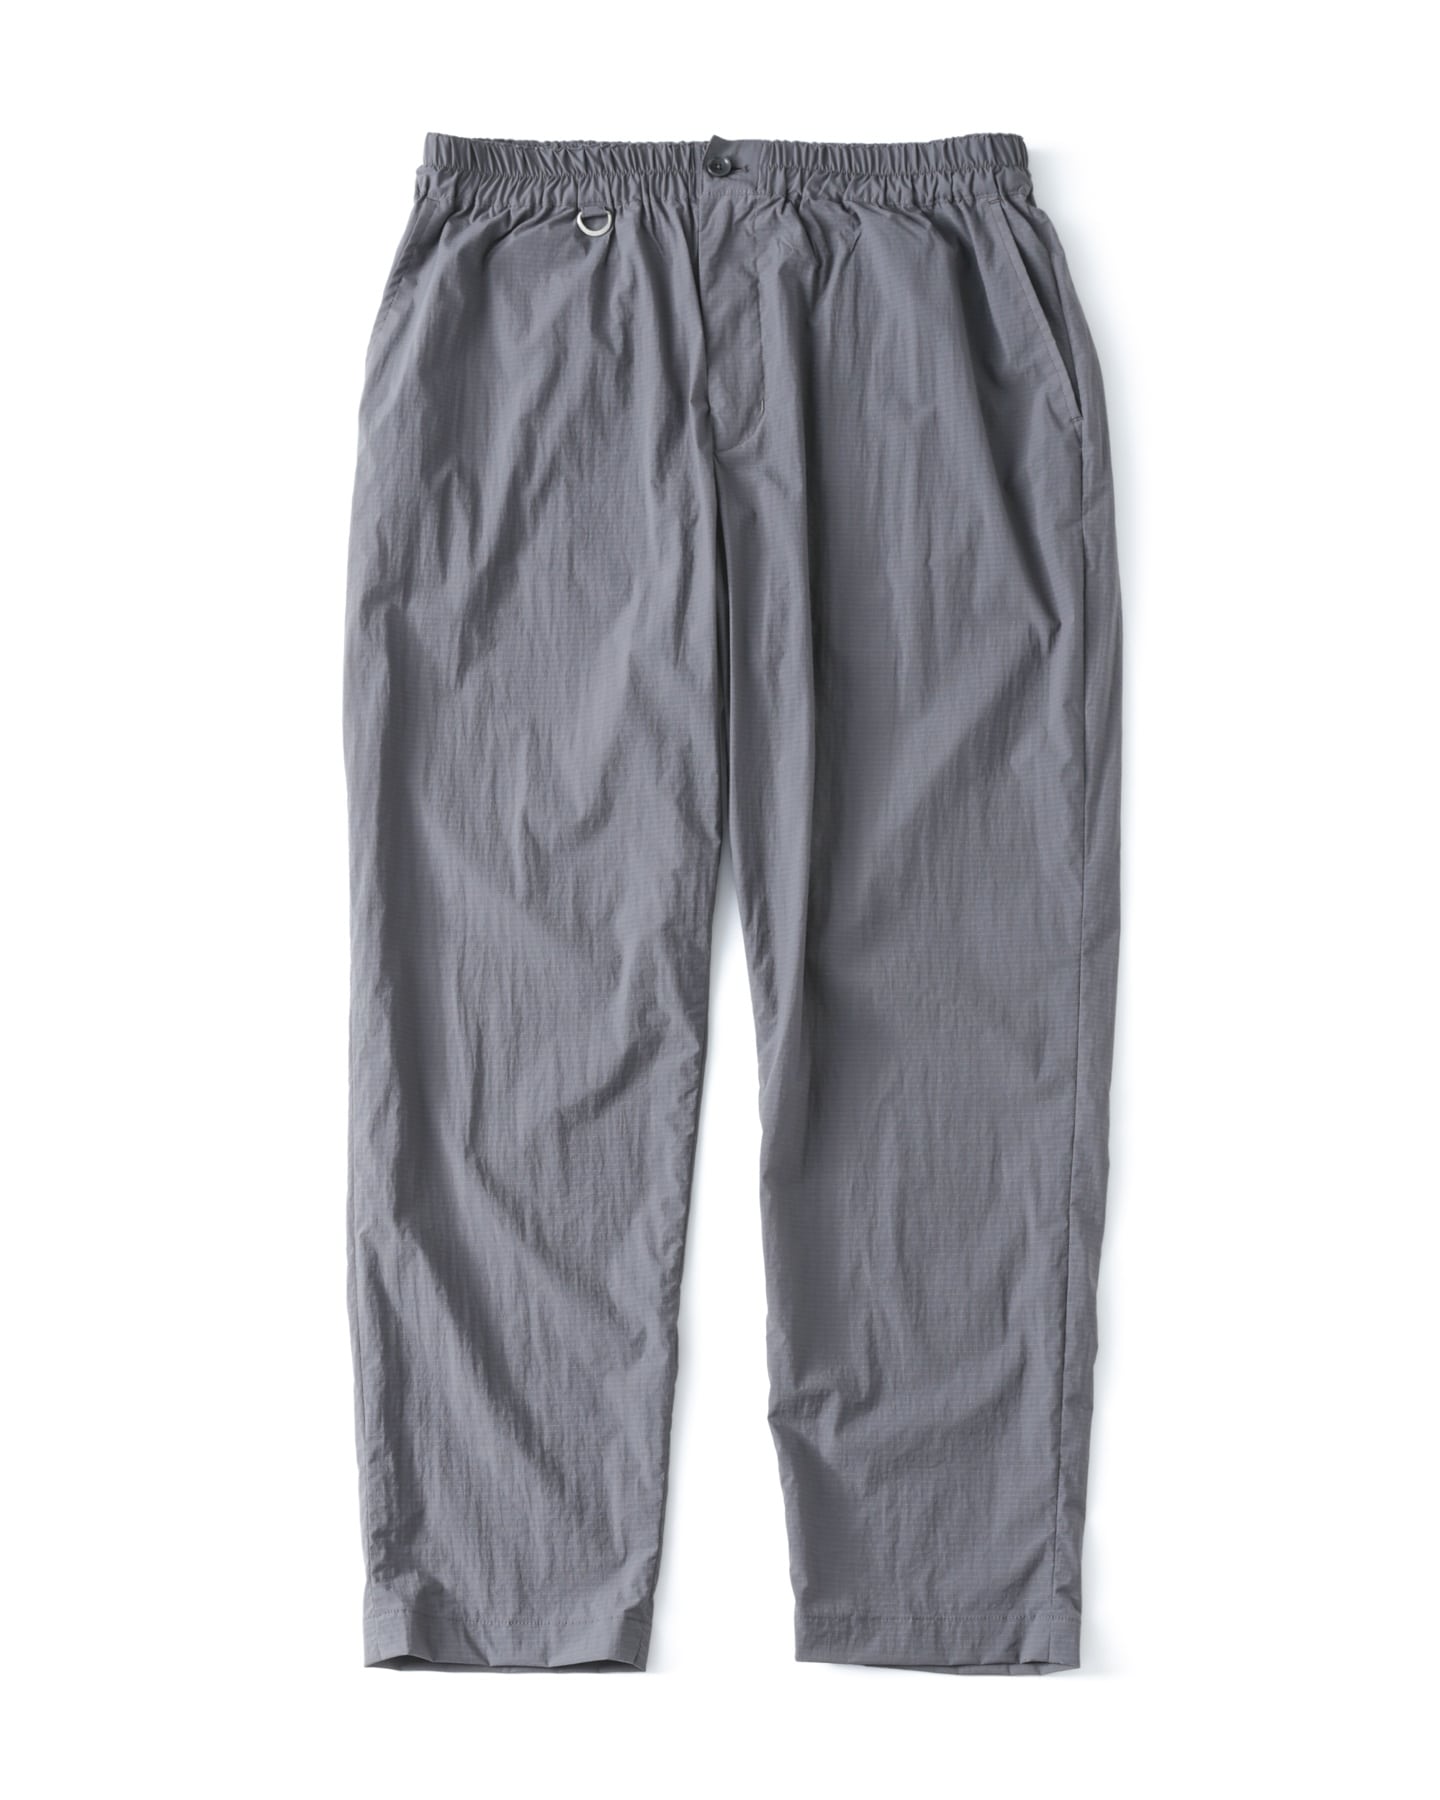 SOPH. | LIGHT WEIGHT STRETCH RIP STOP TAPERED EASY PANTS(M GRAY):